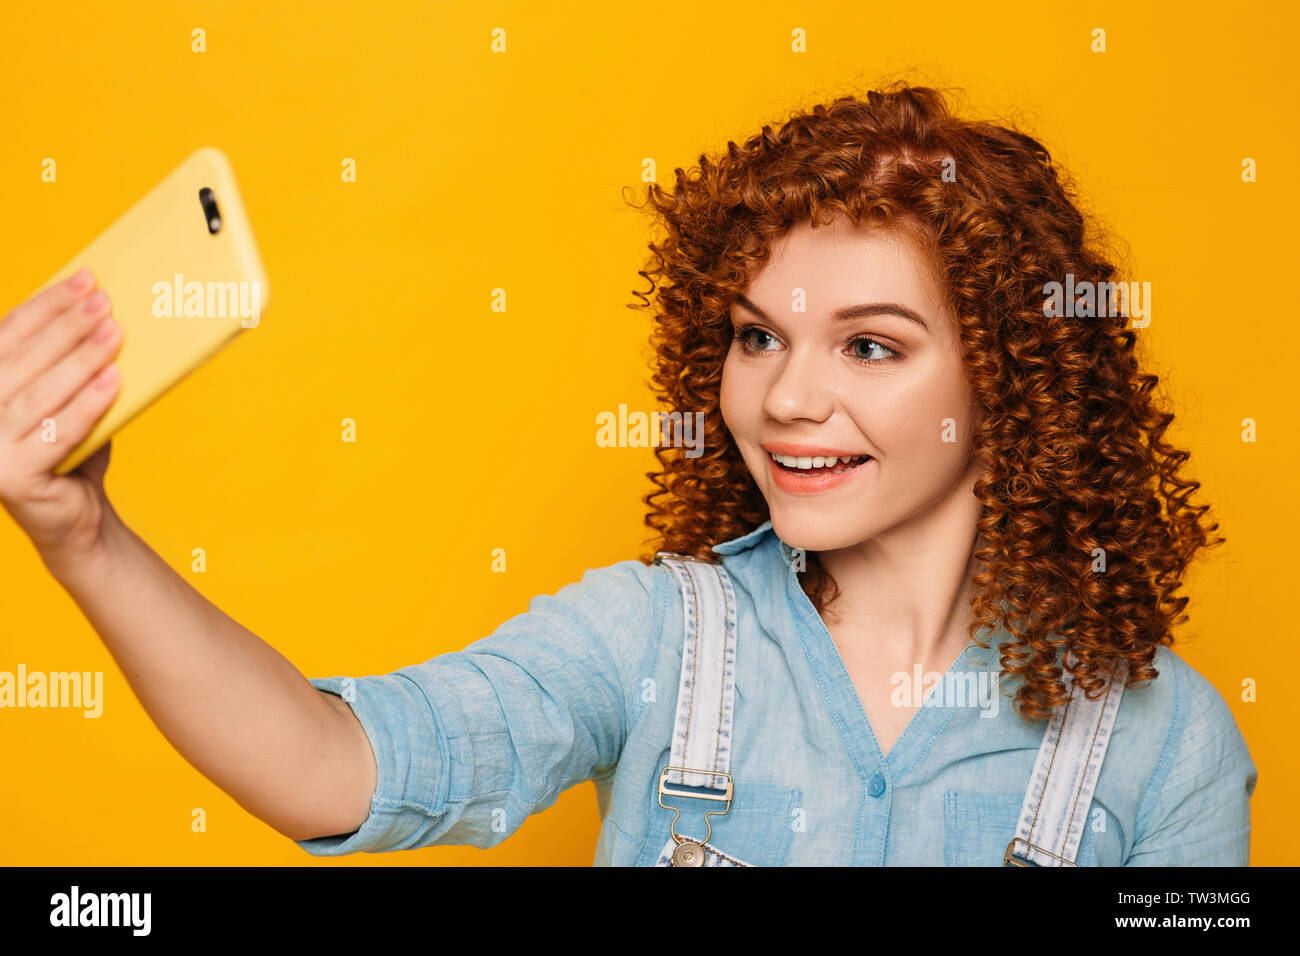 curly haired positive woman making photo on her smartphone on yellow background Stock Photo